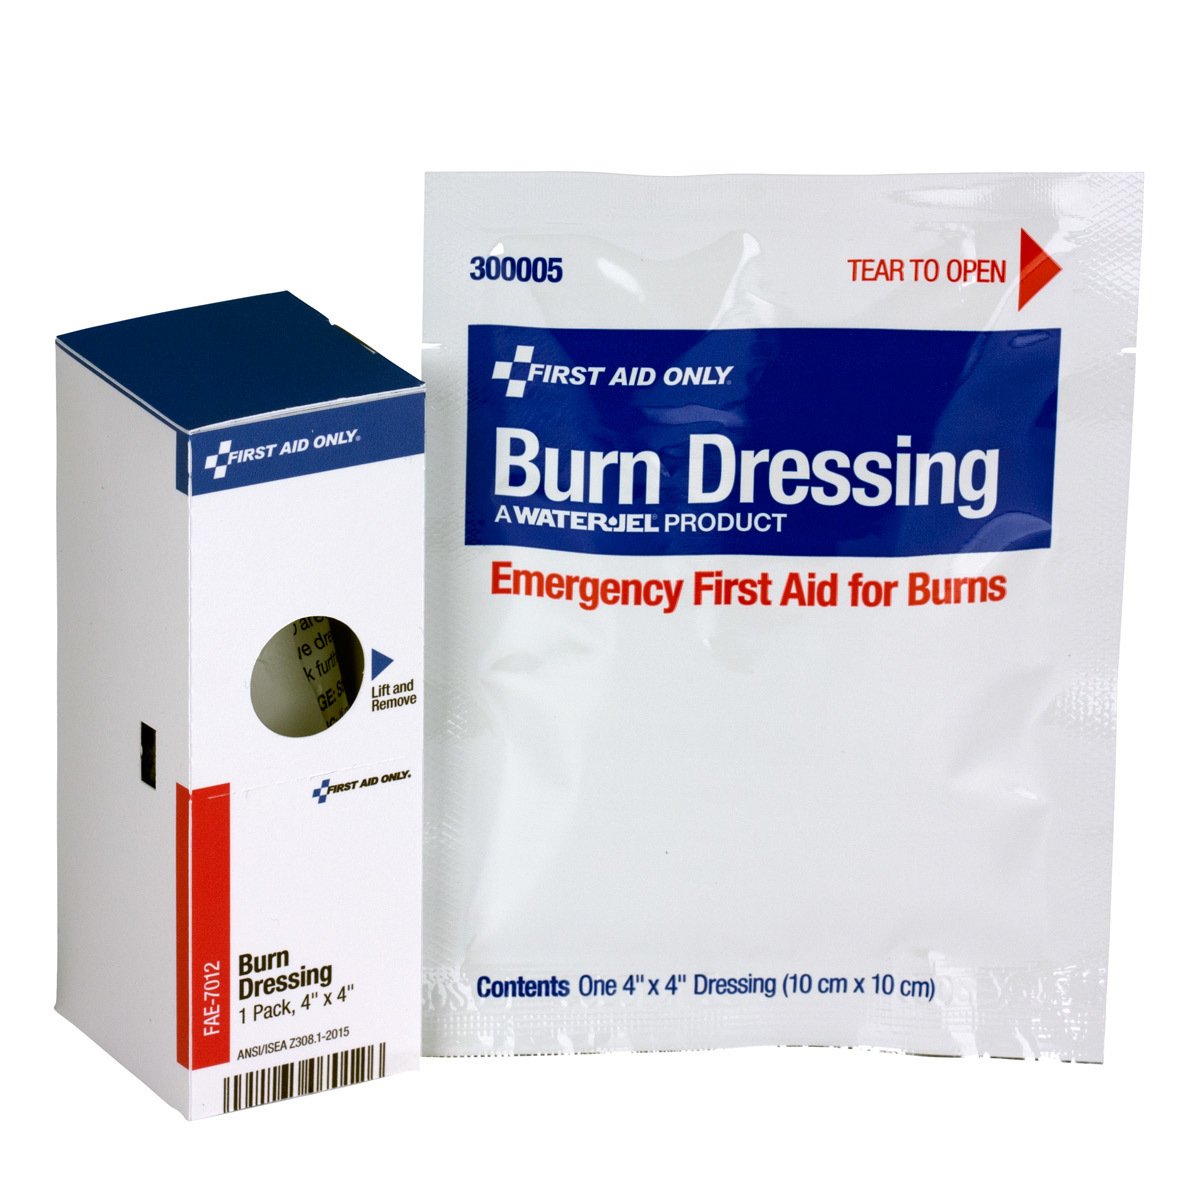 First Aid Only FAE-7012 SmartCompliance Refill 4"X4" Burn Dressing, 1 Per Box